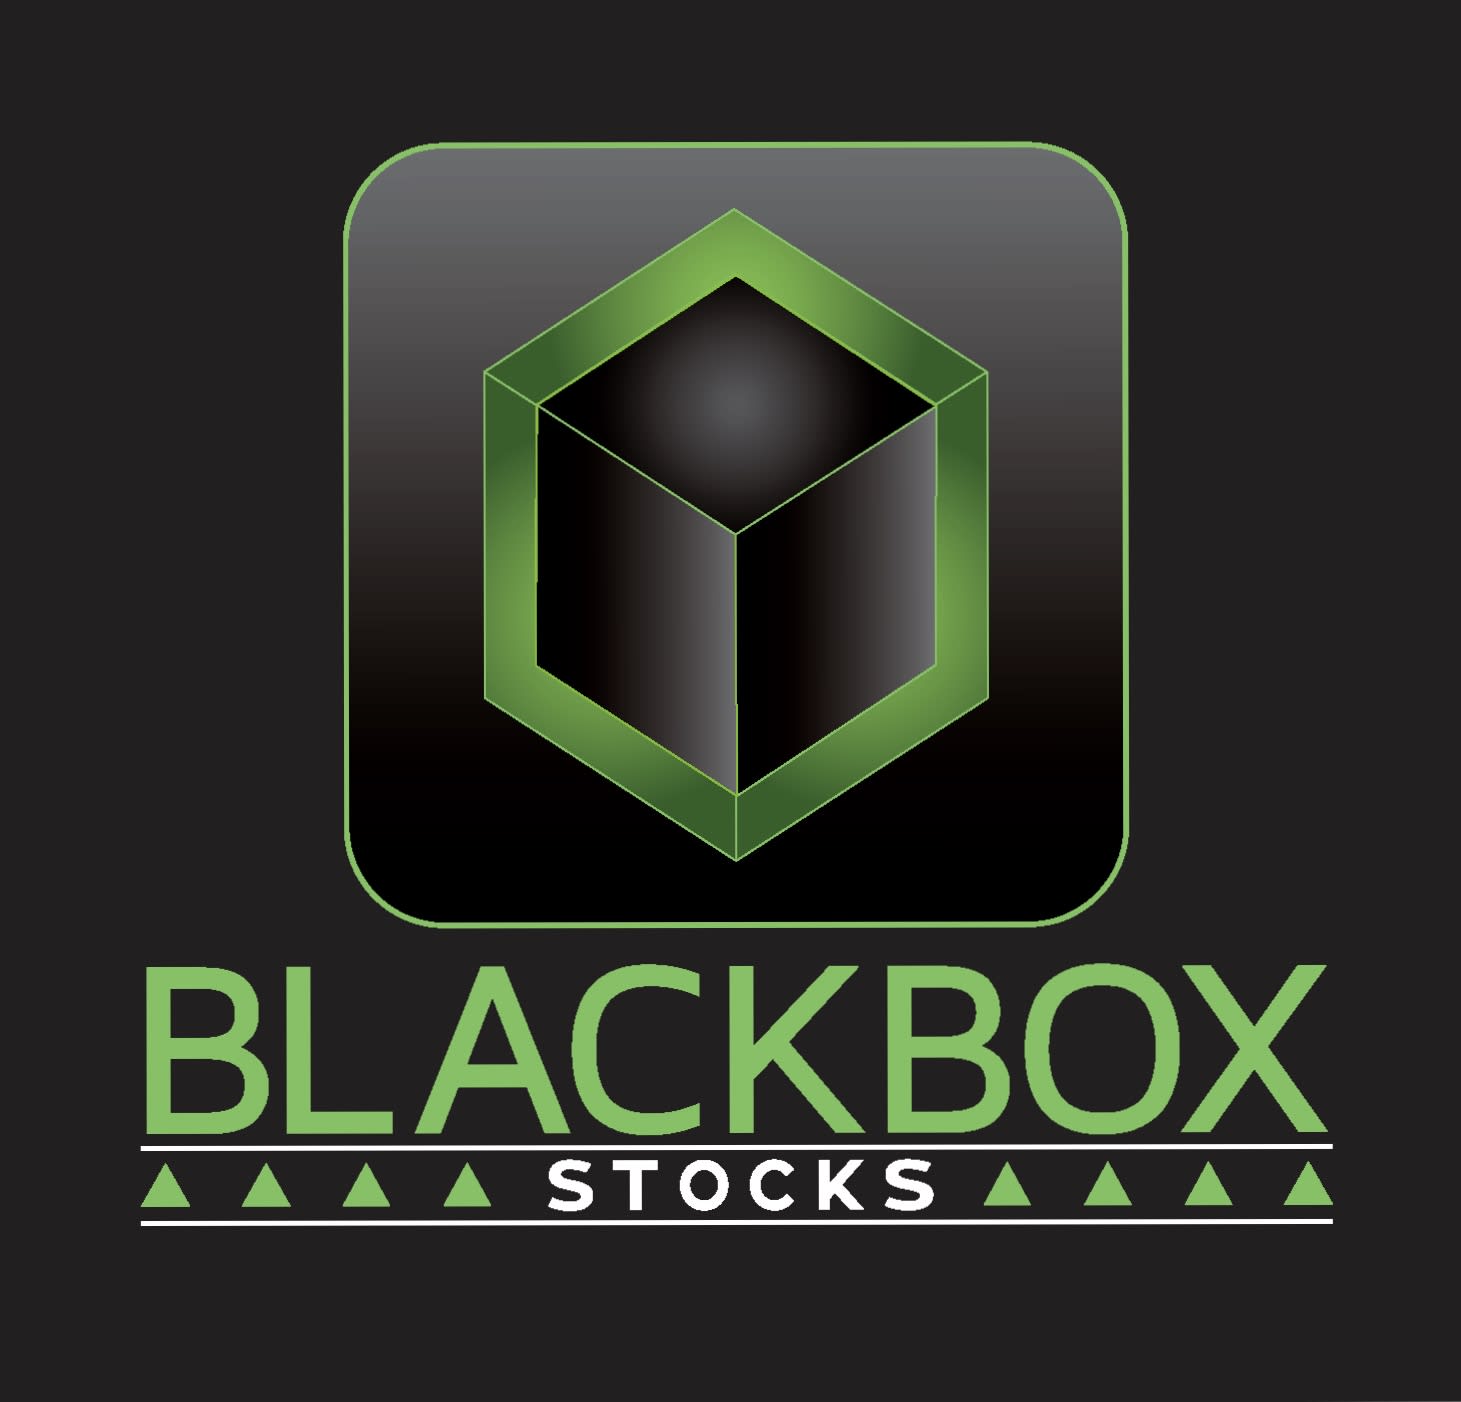 Blackboxstocks, Inc. Stock Surges By 182% Since March, Short-Squeeze, Joint-Ventures, And Record Revenues Fuel The Rally ($BLBX)